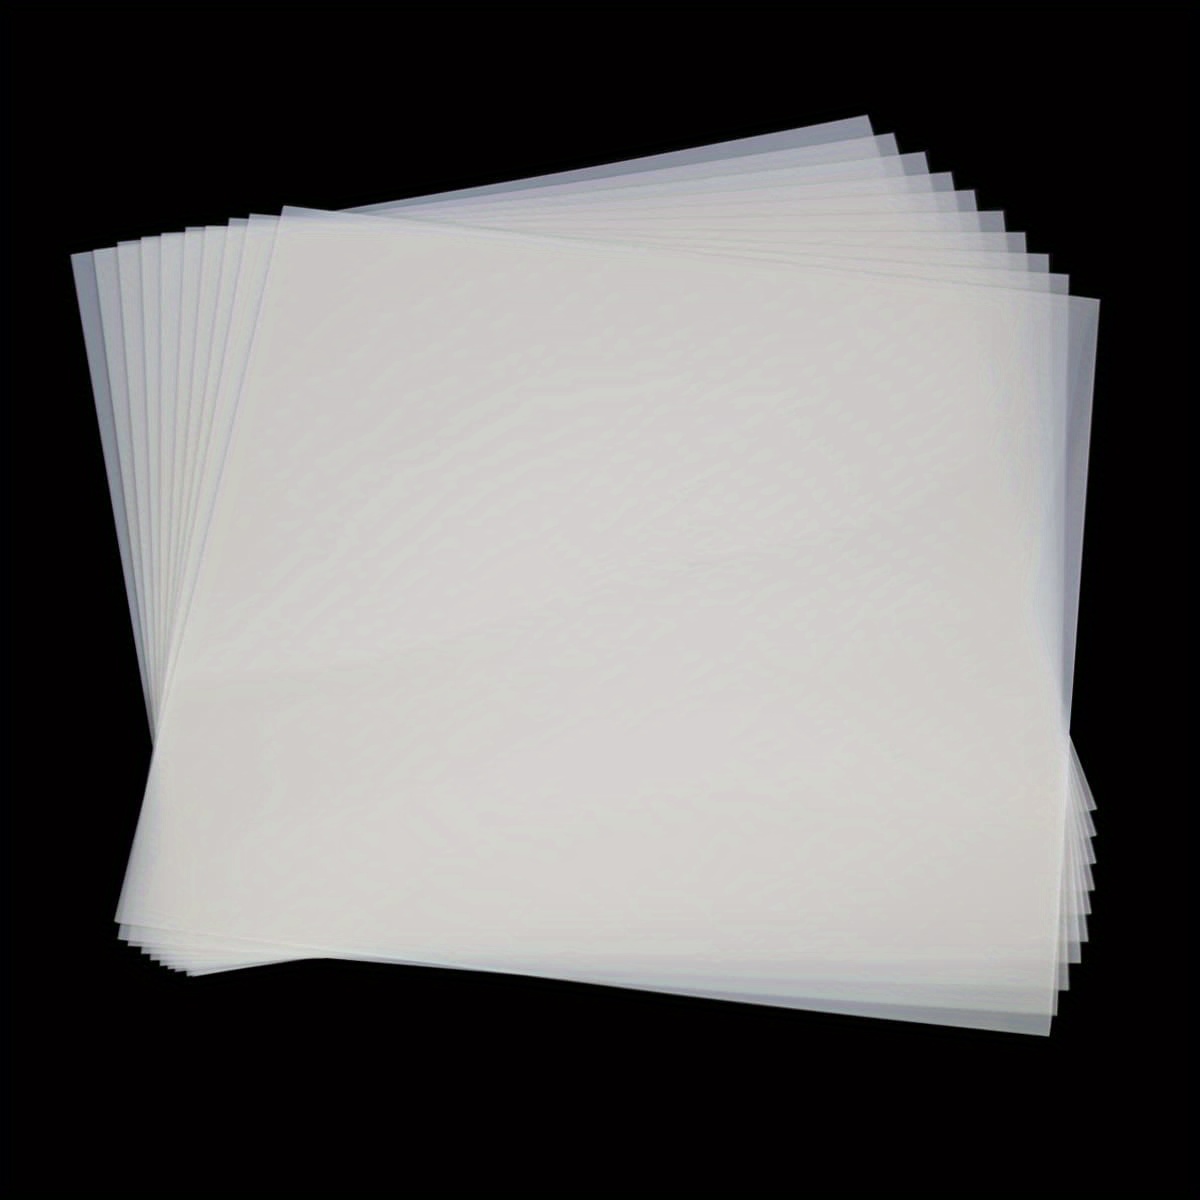 10pcs 10mil Blank Mylar Stencil Sheets, Rusable 12X12 Inch Milky  Translucent PET Blank Stencils Sheets, Template Material For Cutting  Machines, Laser